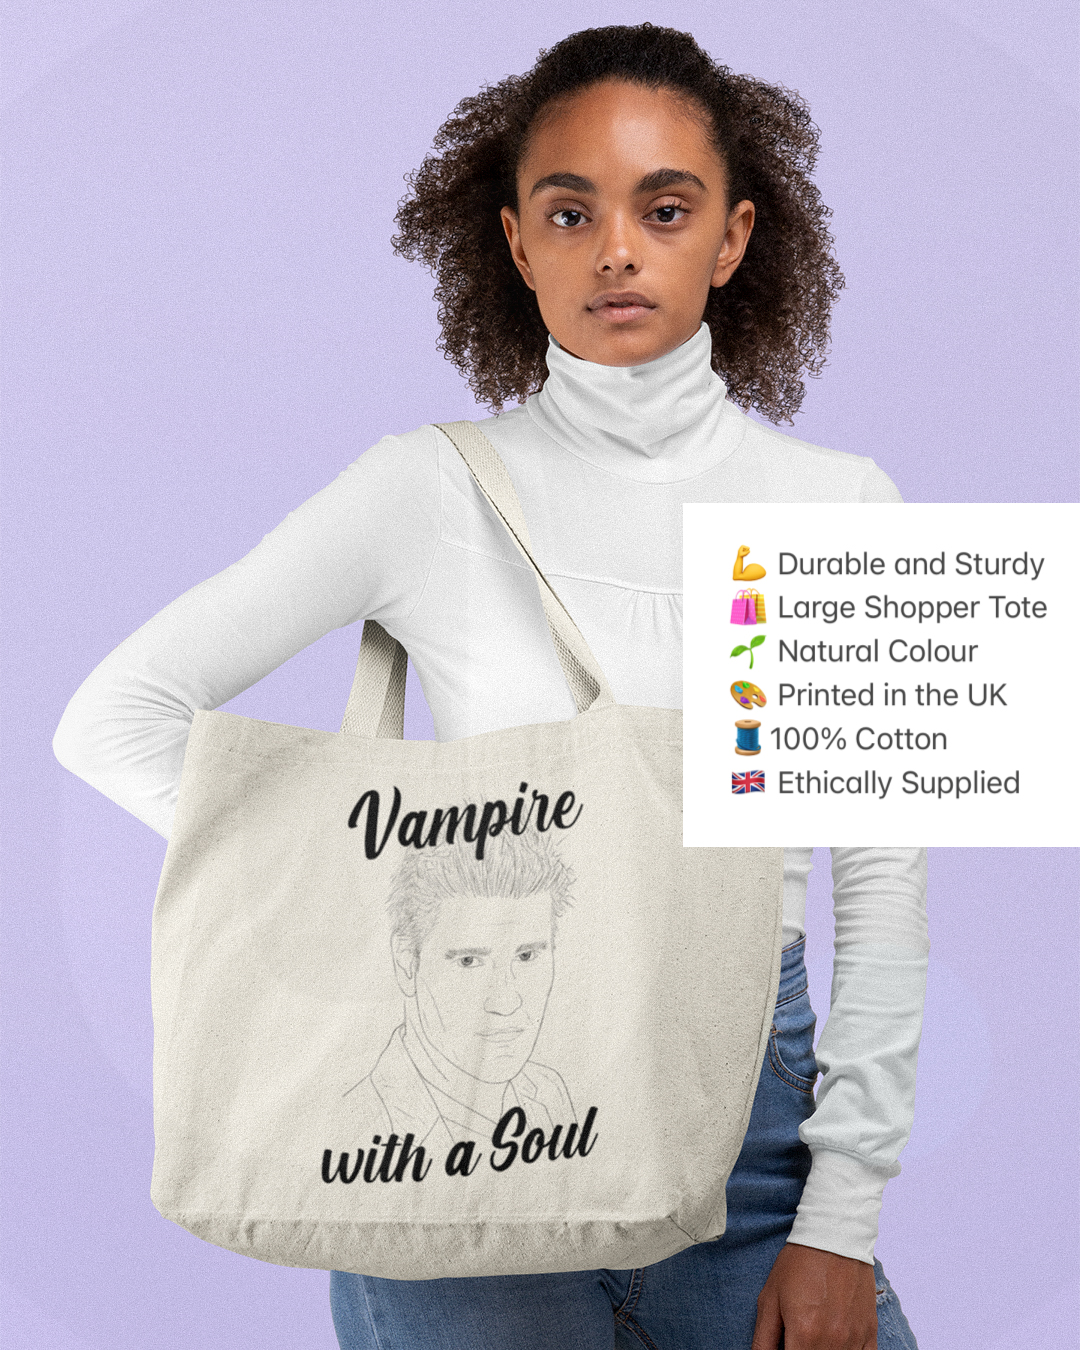 Vampire With A Soul Buffy The Vampire Slayer Inspired Tote Bag - Vampire With A Soul Tote Bag - Buffy The Vampire Slayer Inspired Tote Bag - Buffy Angel Tote Bag Shopper